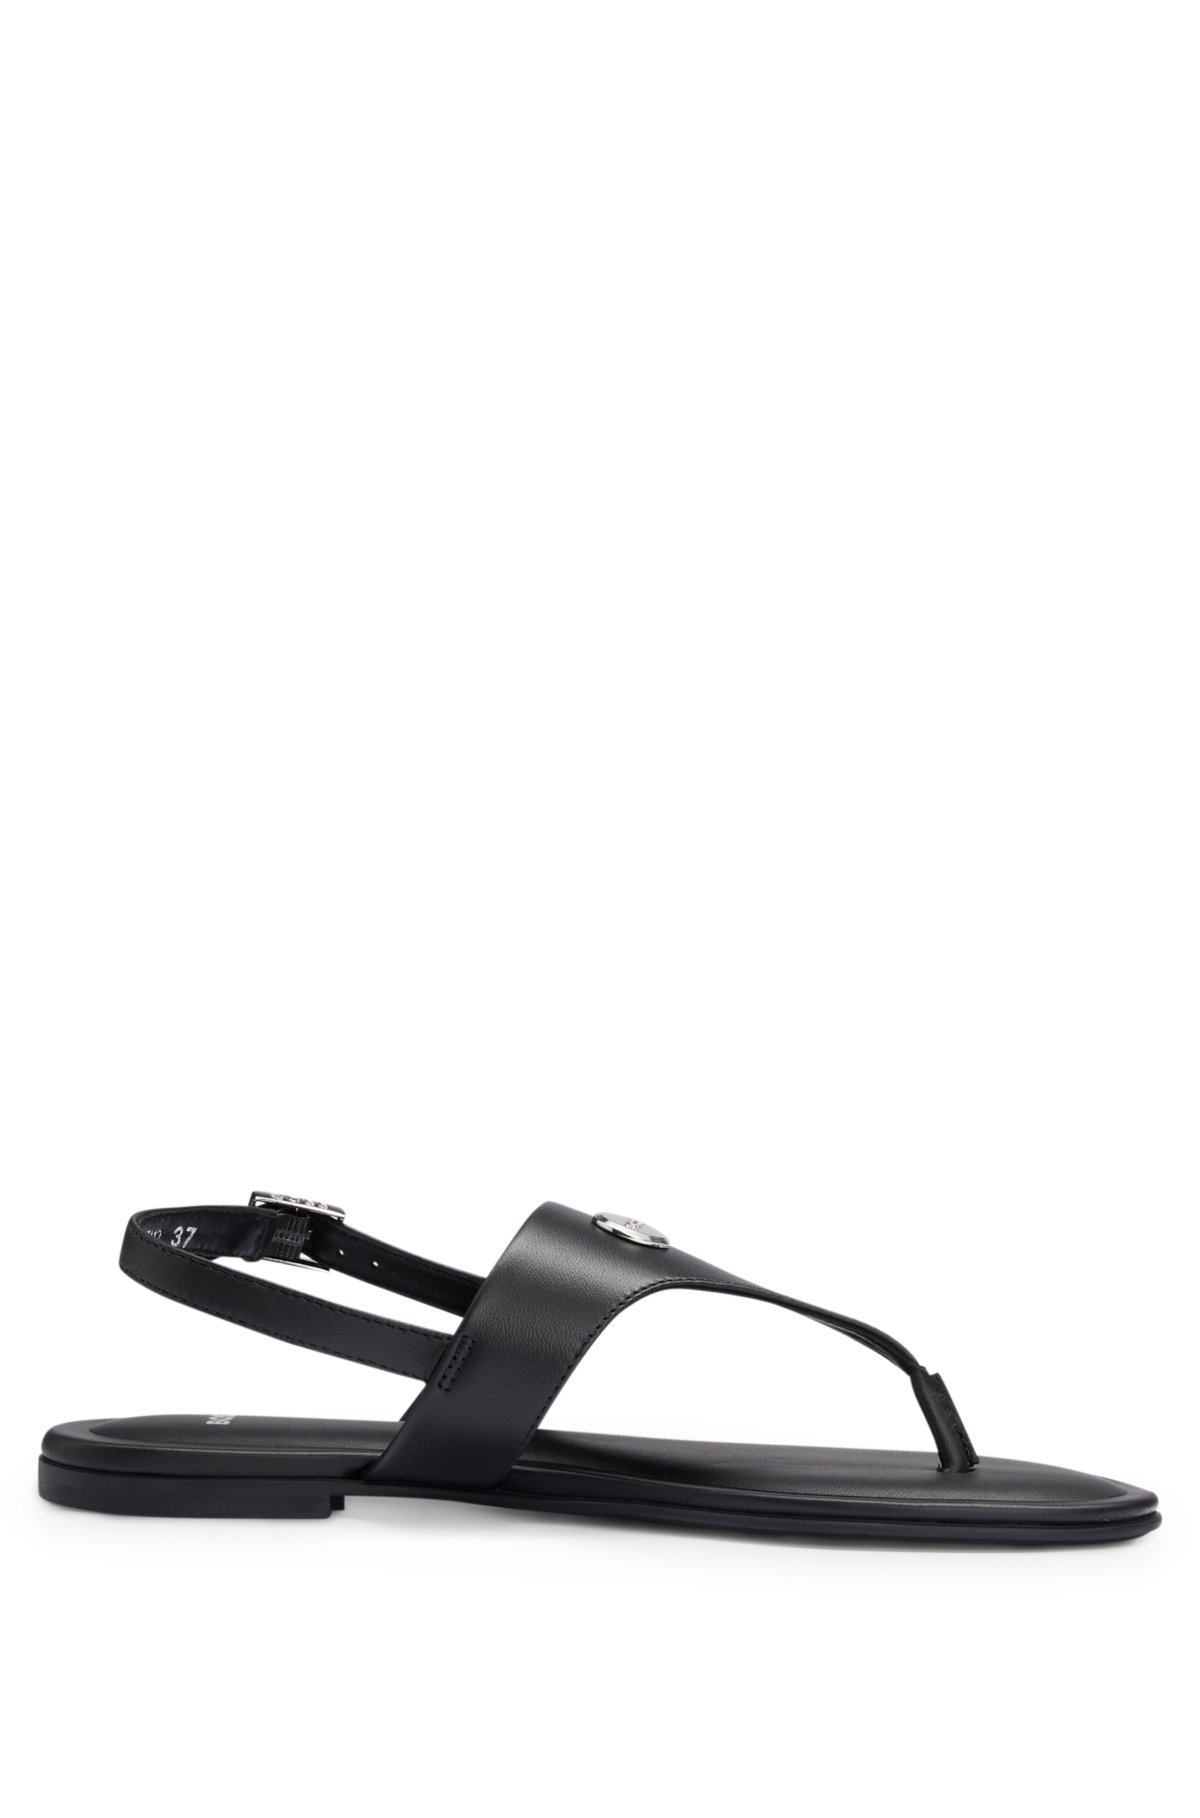 Toe-post sandals in nappa leather with buckled strap, Black